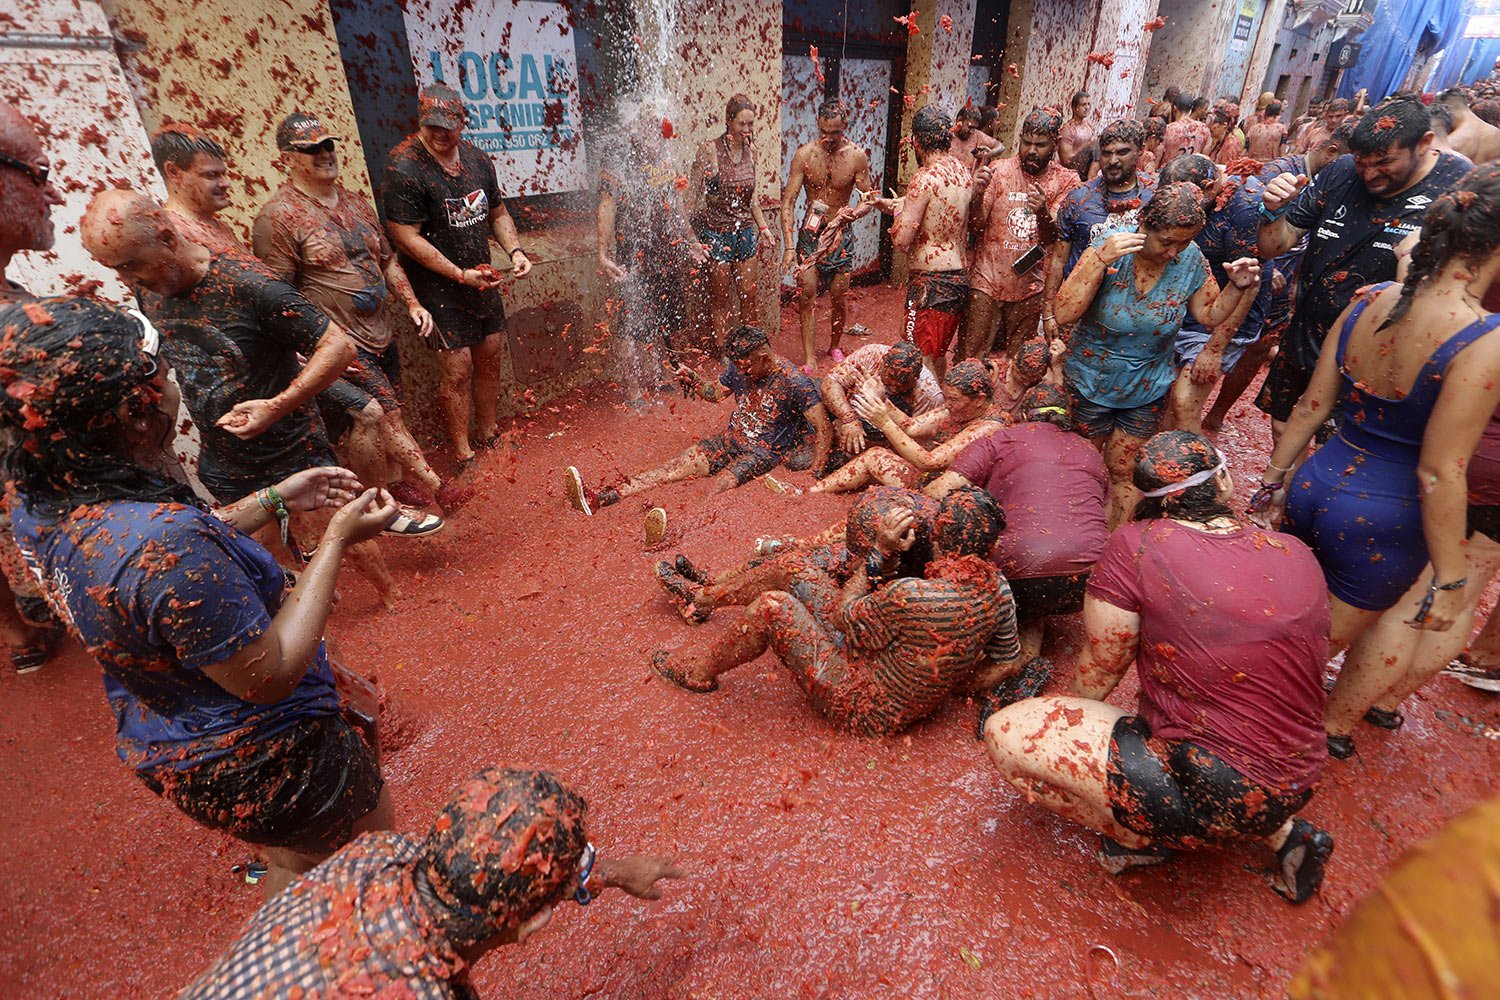  People hurl tomatoes at each other during the annual tomato street fight in Bunol, Spain, Wednesday, Aug. 30, 2023. (AP Photo/Alberto Saiz) 